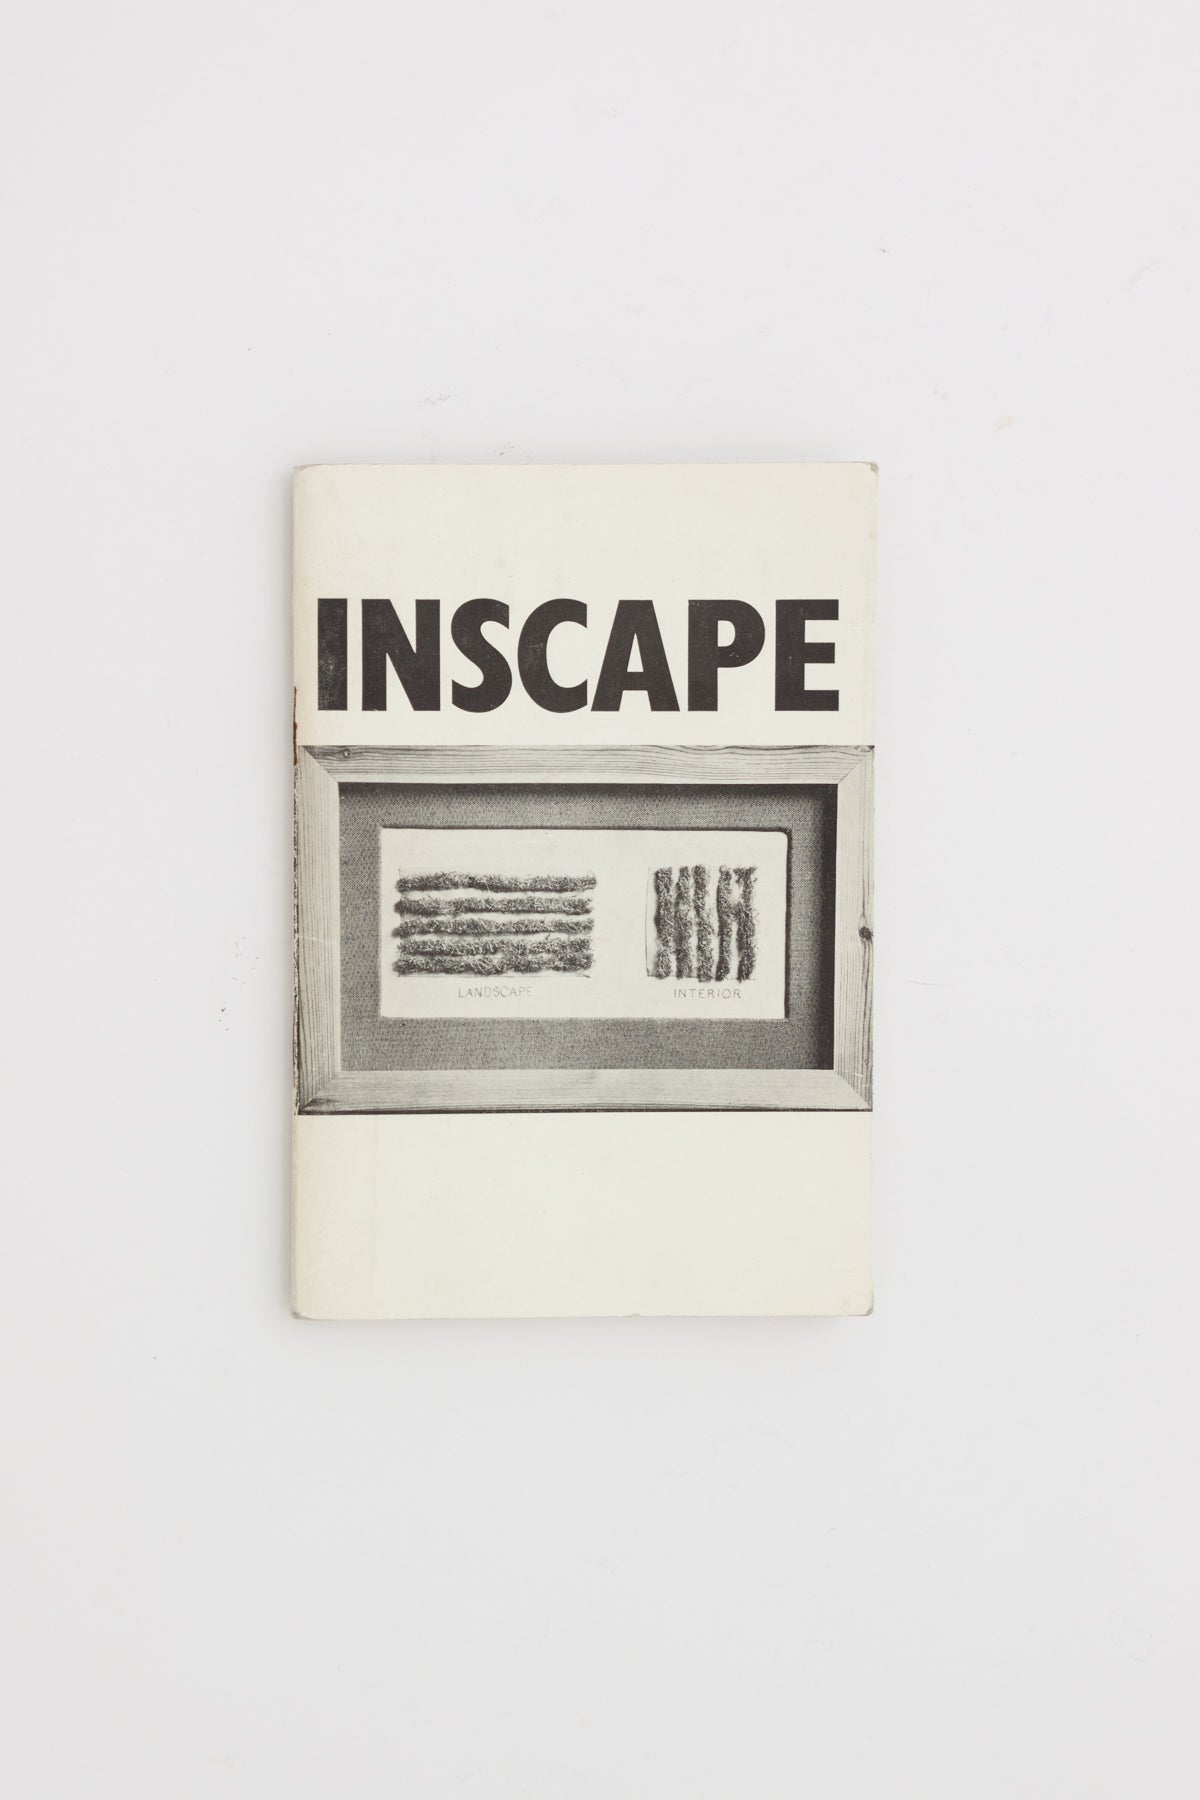 Inscape - Paul Overy